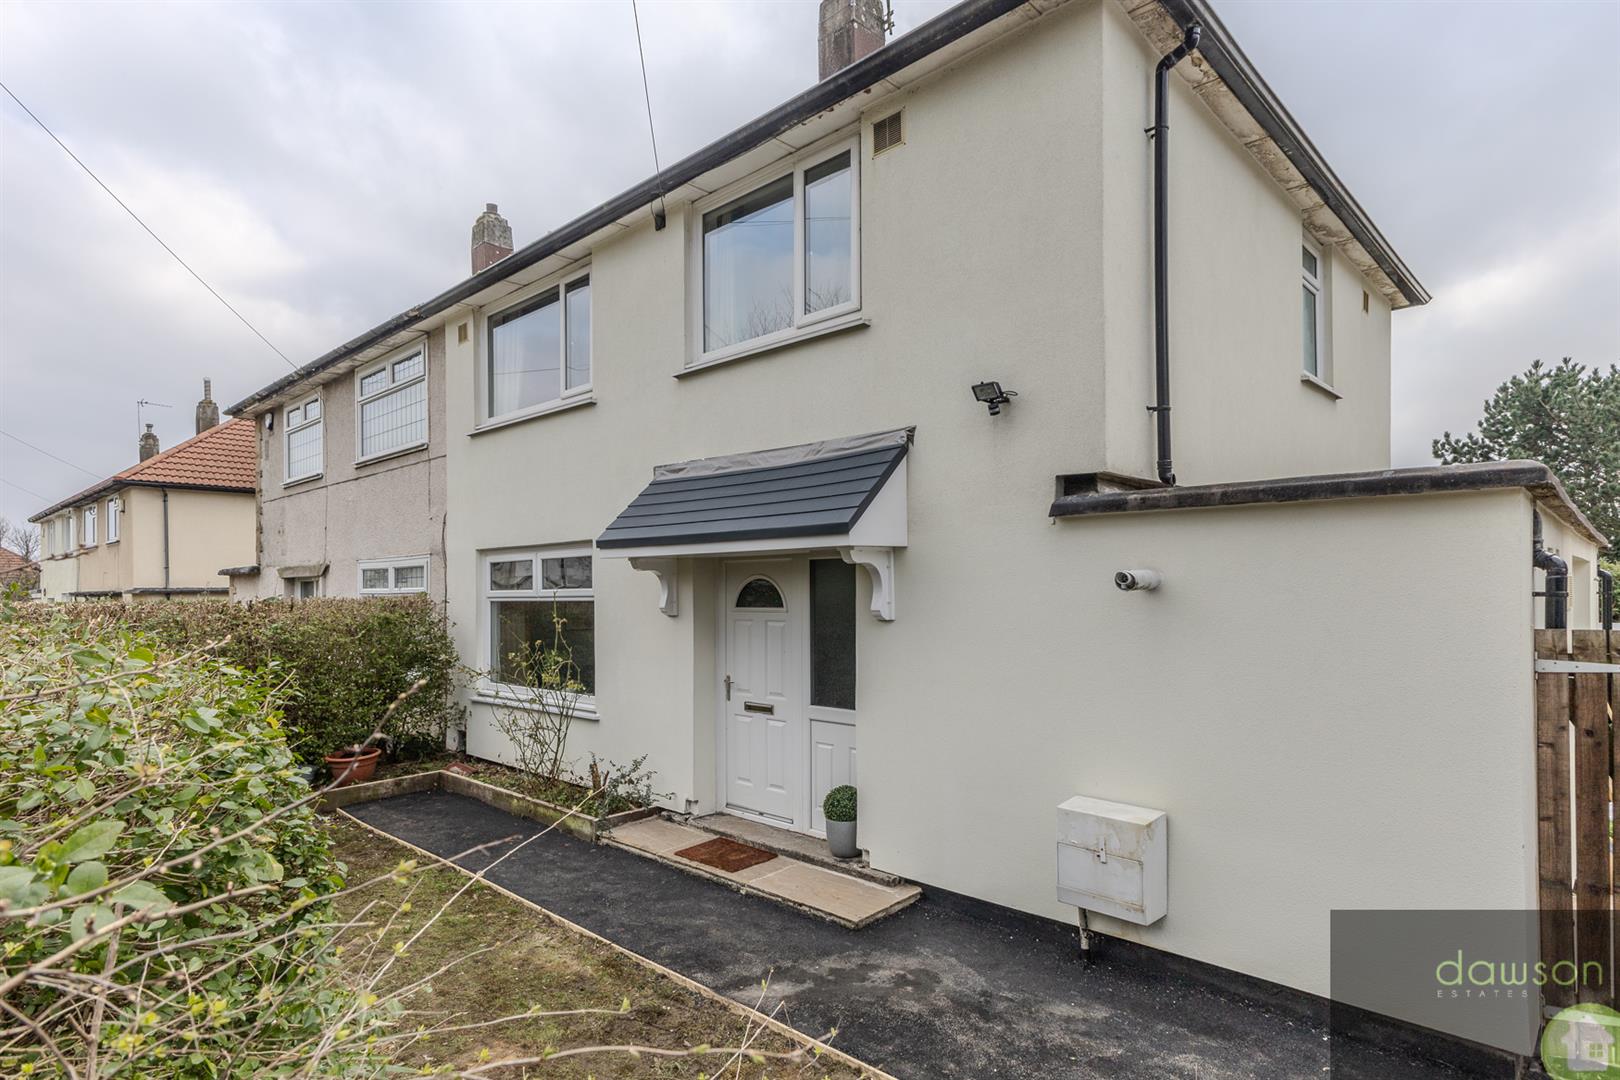 3 bed semi-detached house for sale in Iveson Drive, Leeds - Property Image 1